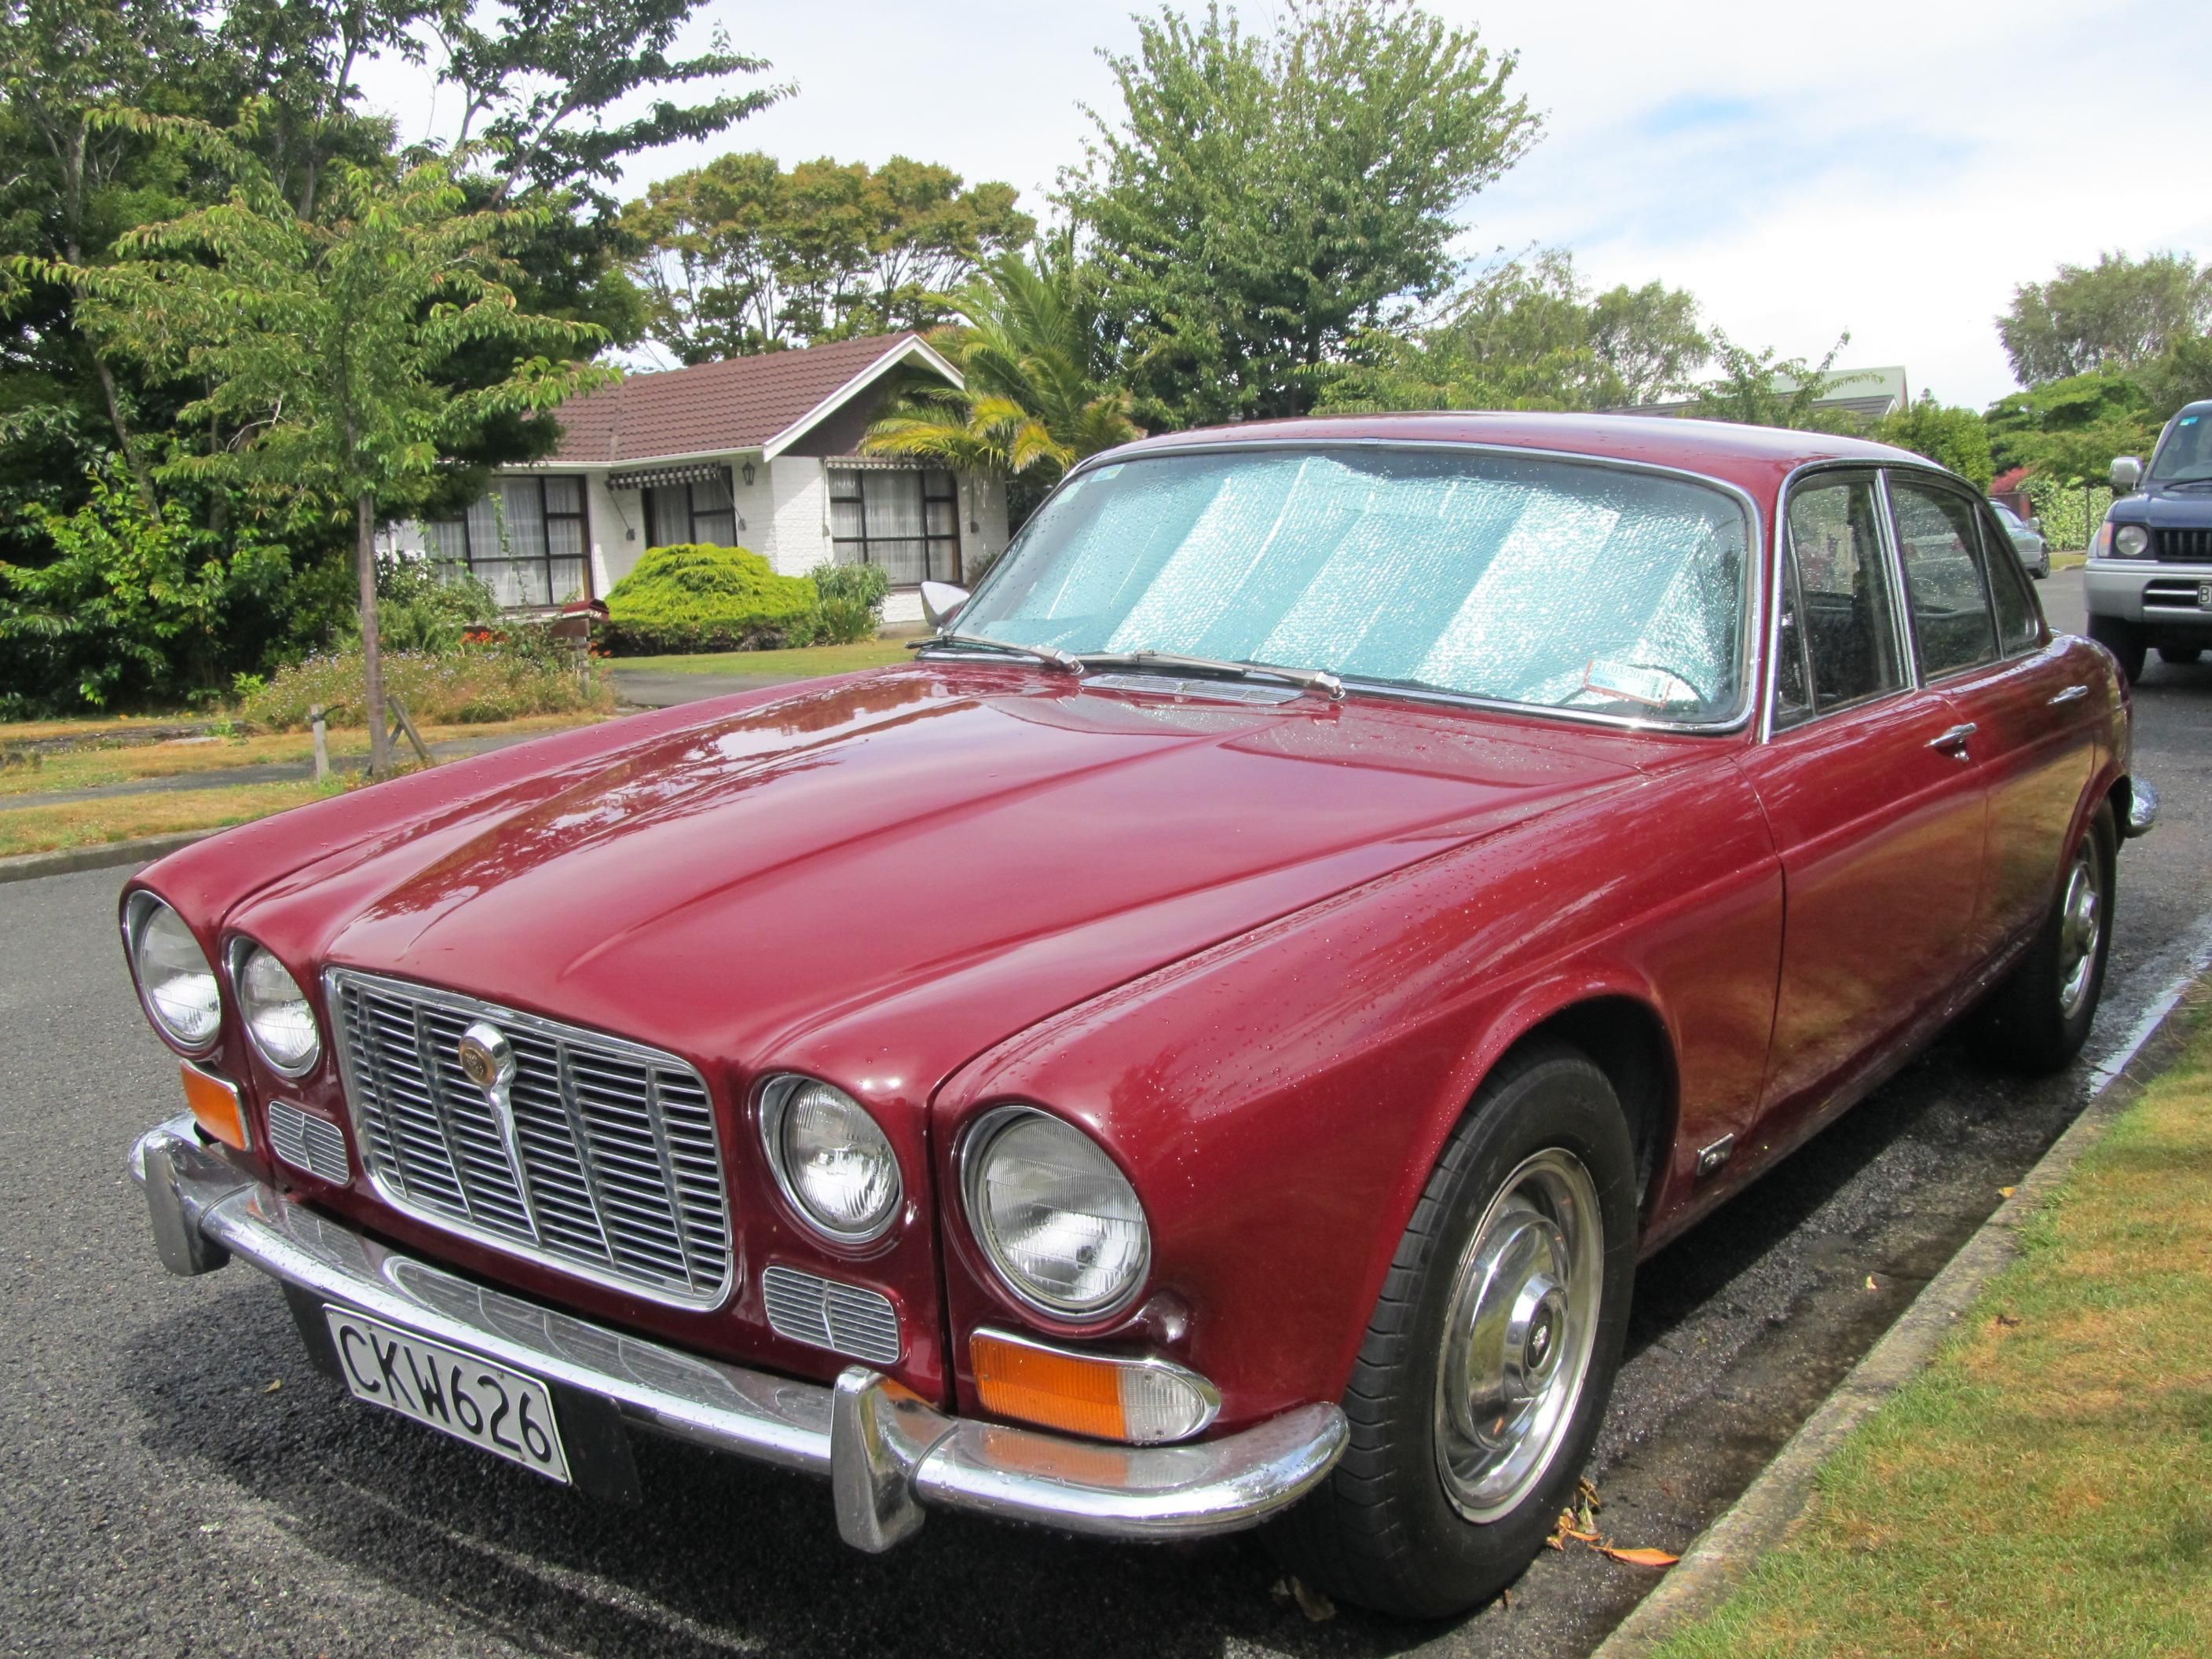 1969 Jaguar XJ6: The luxury car that is a blast from the past.